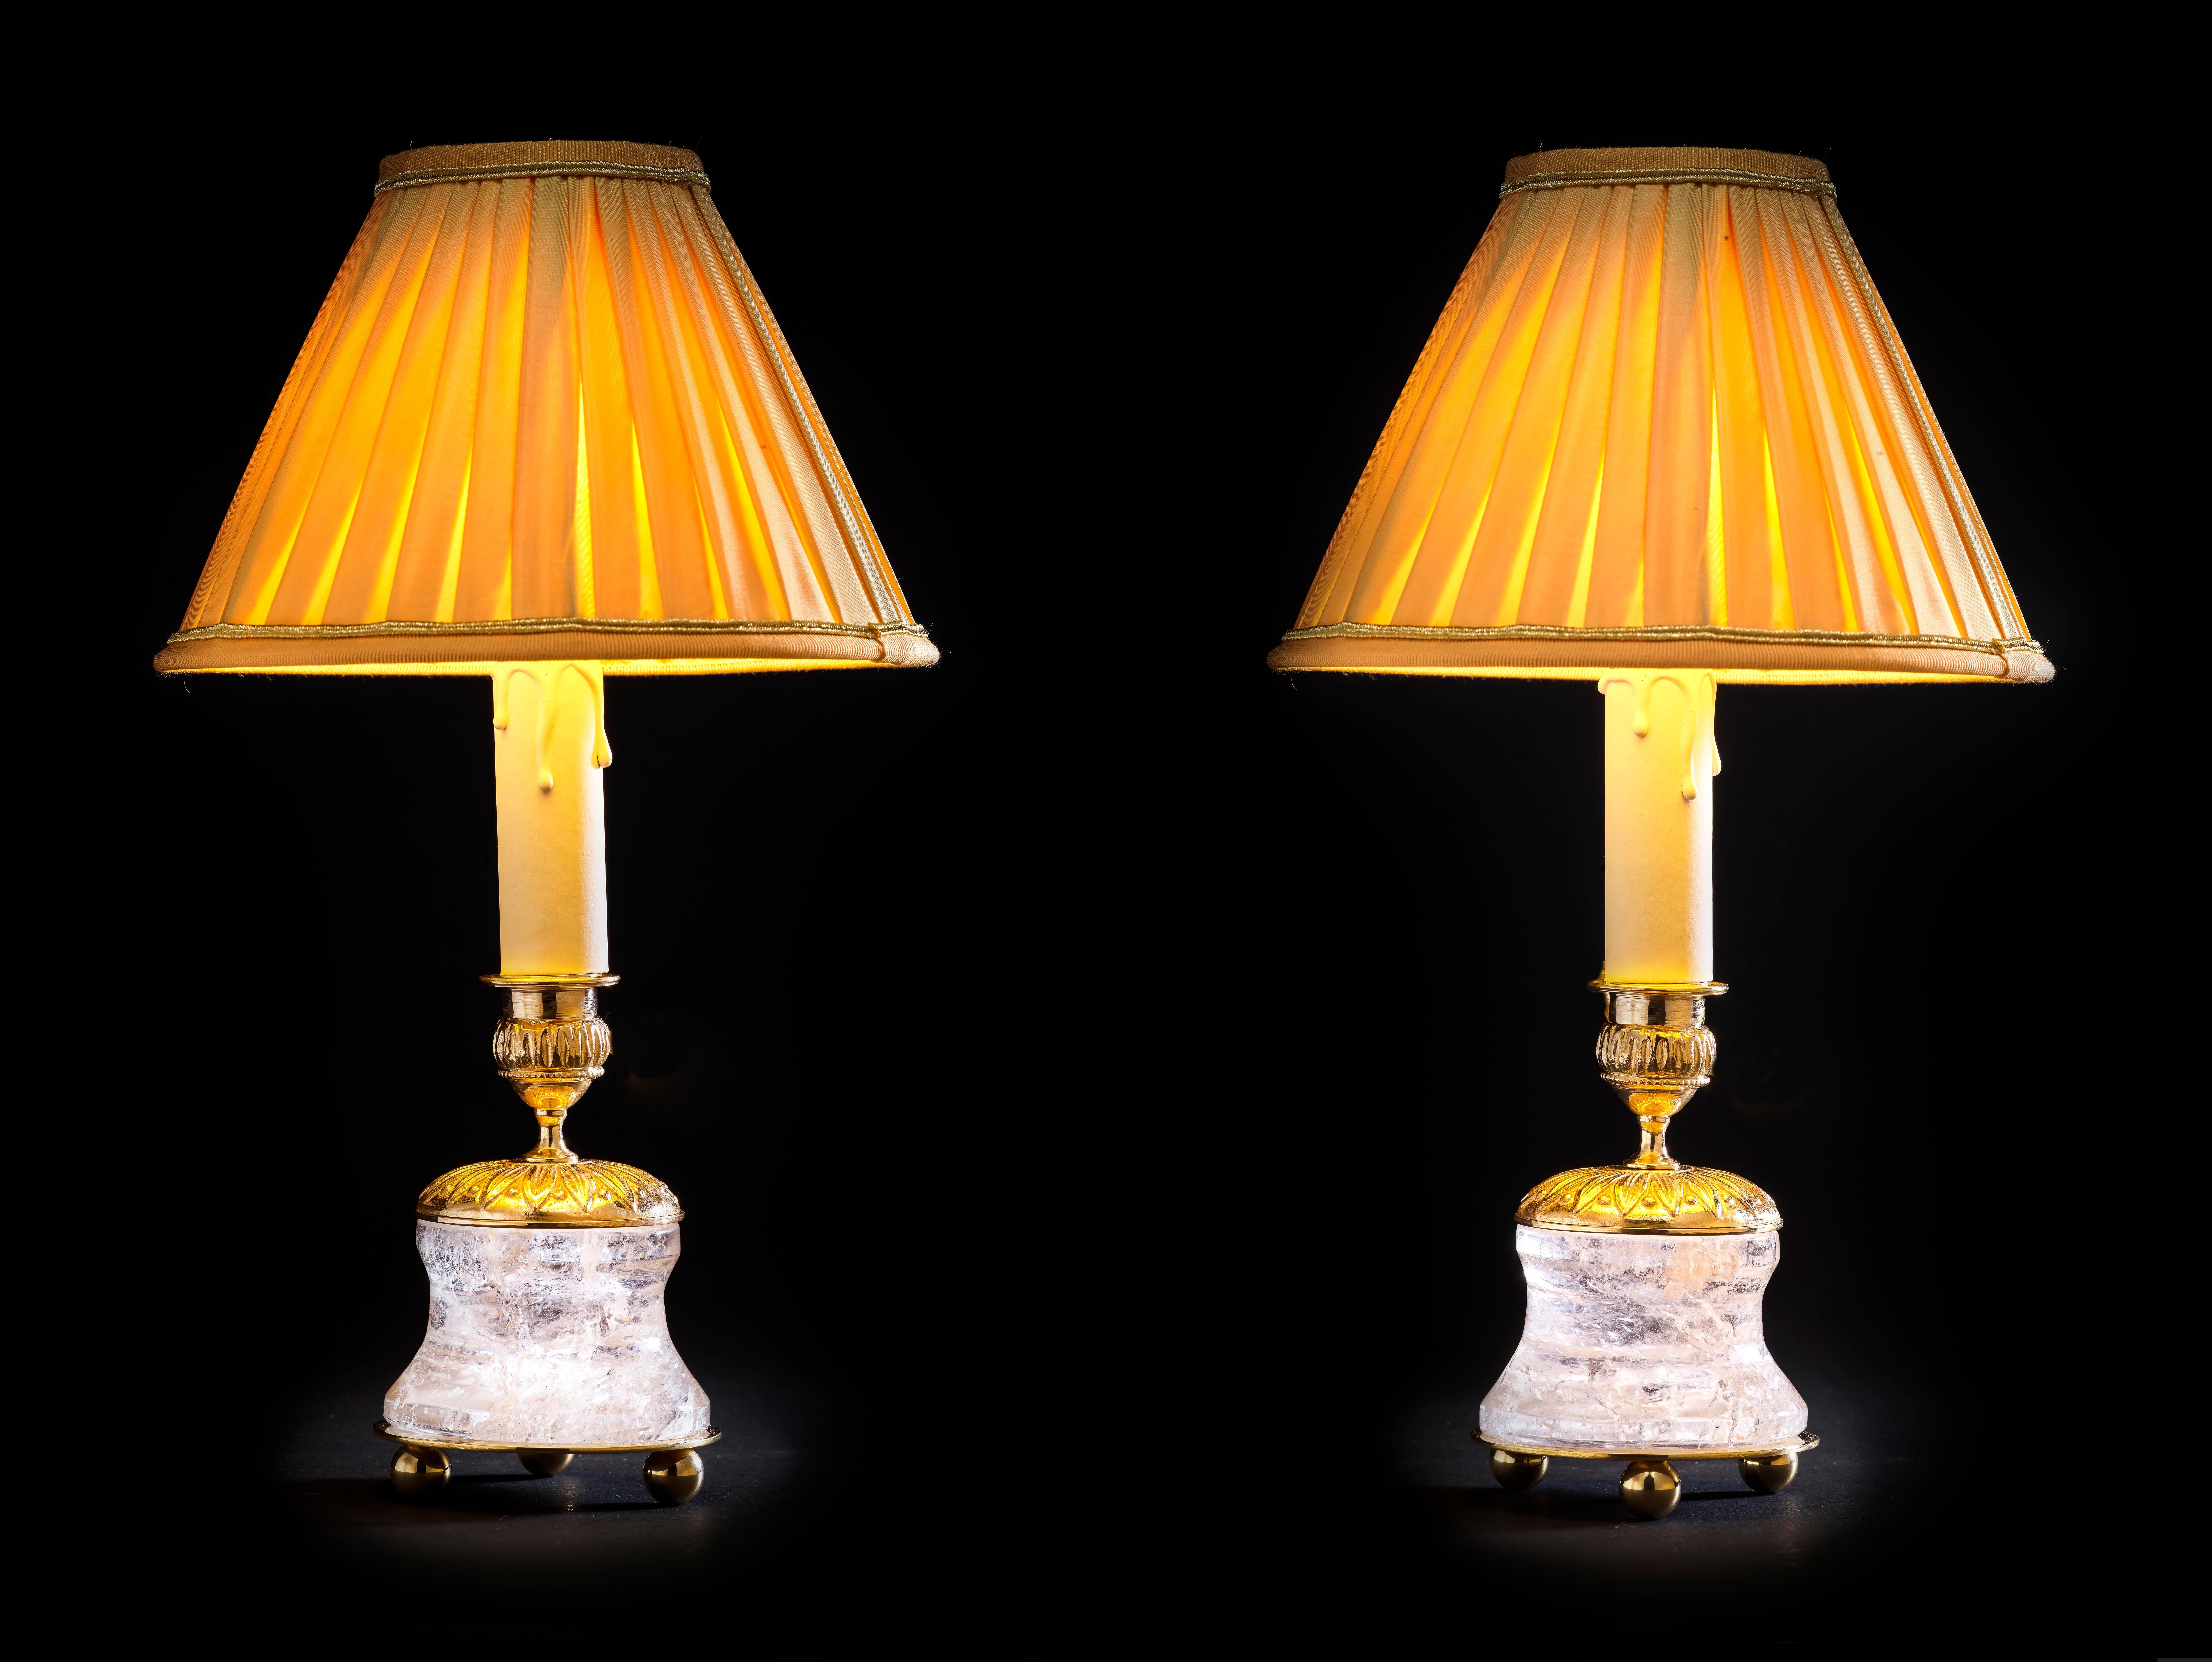 Rock crystal French First Empire style 24-karat Ormolu gilding bronze gold lampshades made by Alexandre Vossion.
This model can be also used as candlesticks to make your dining table so chic.
Others colors for the lampshades are also available and